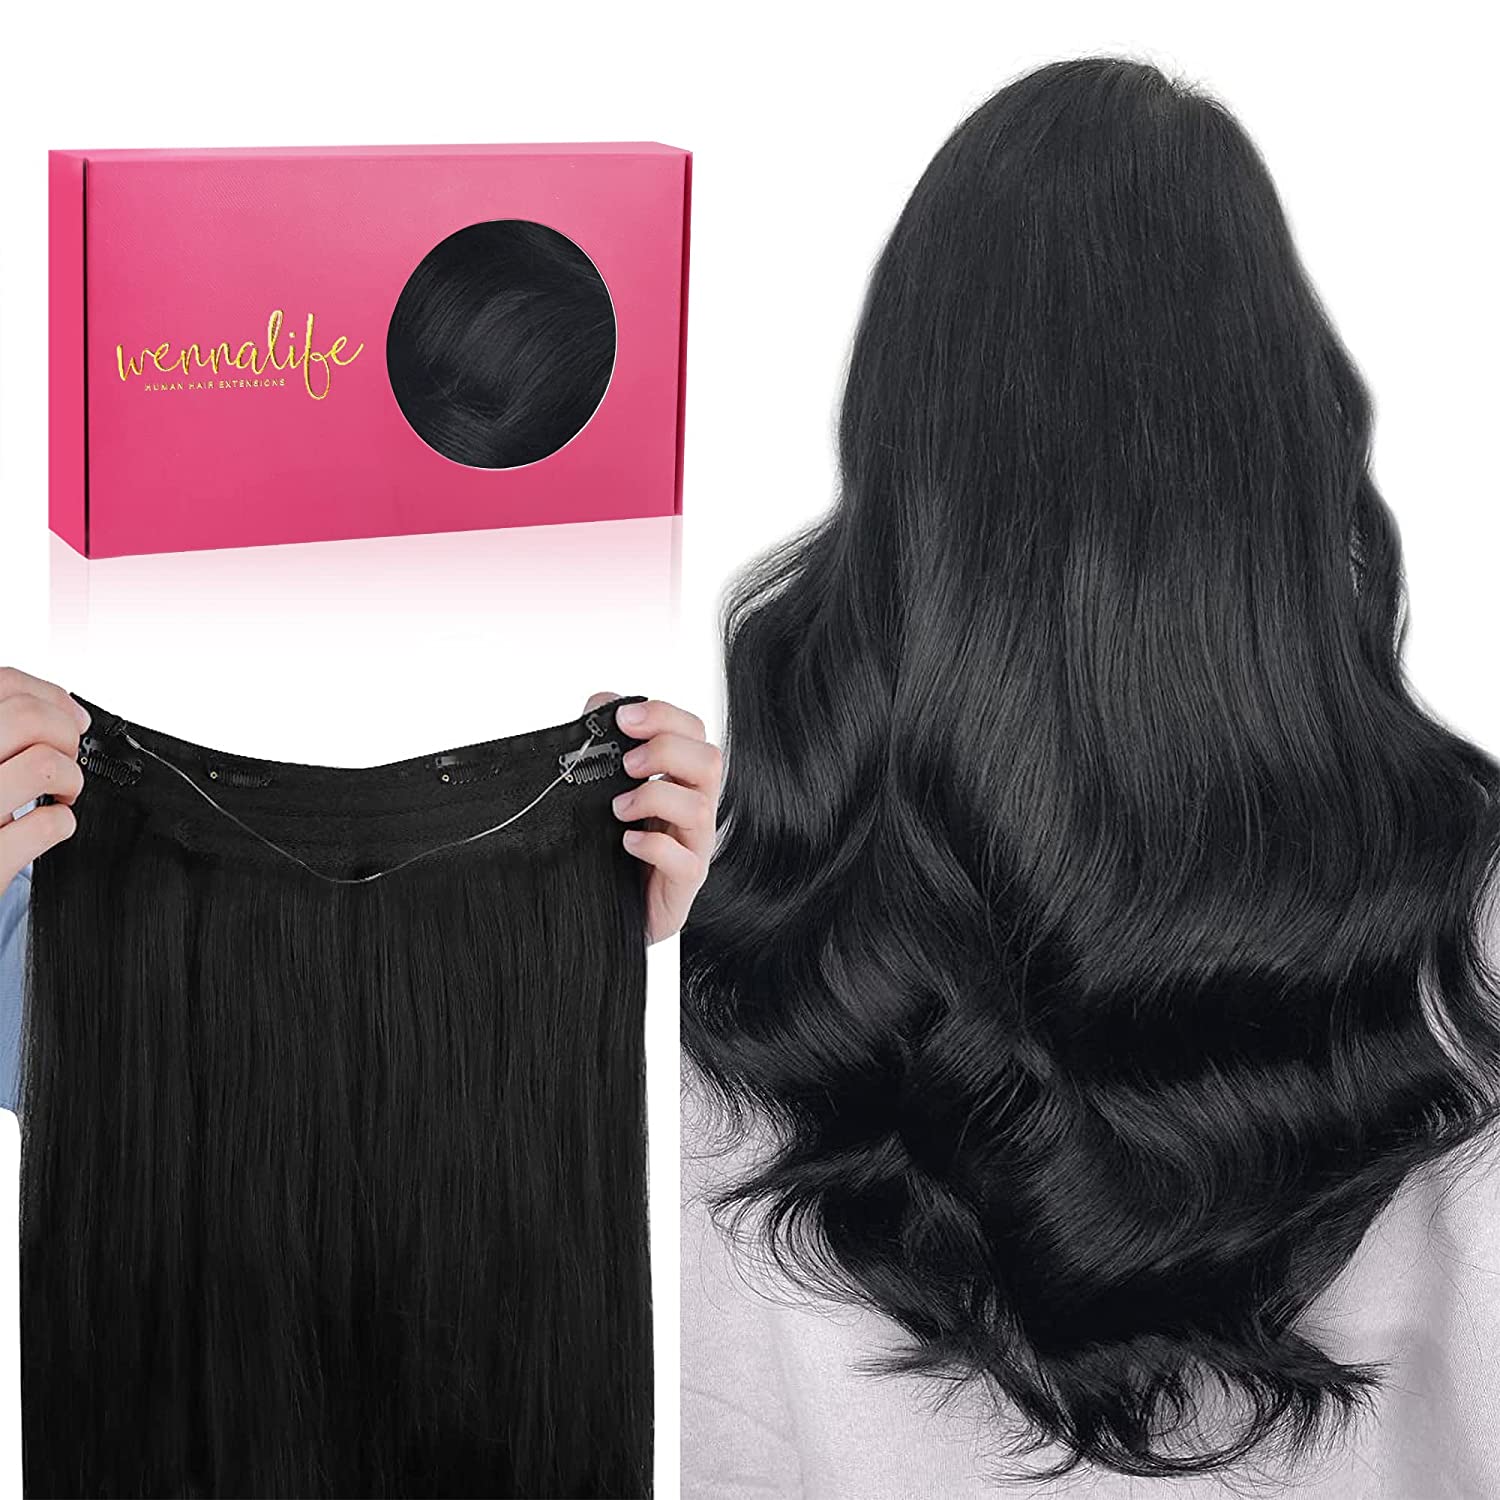 Invisible Wire Extensions - Jet Black, 100% Real Human Hair, 14 inches | Canada Hair